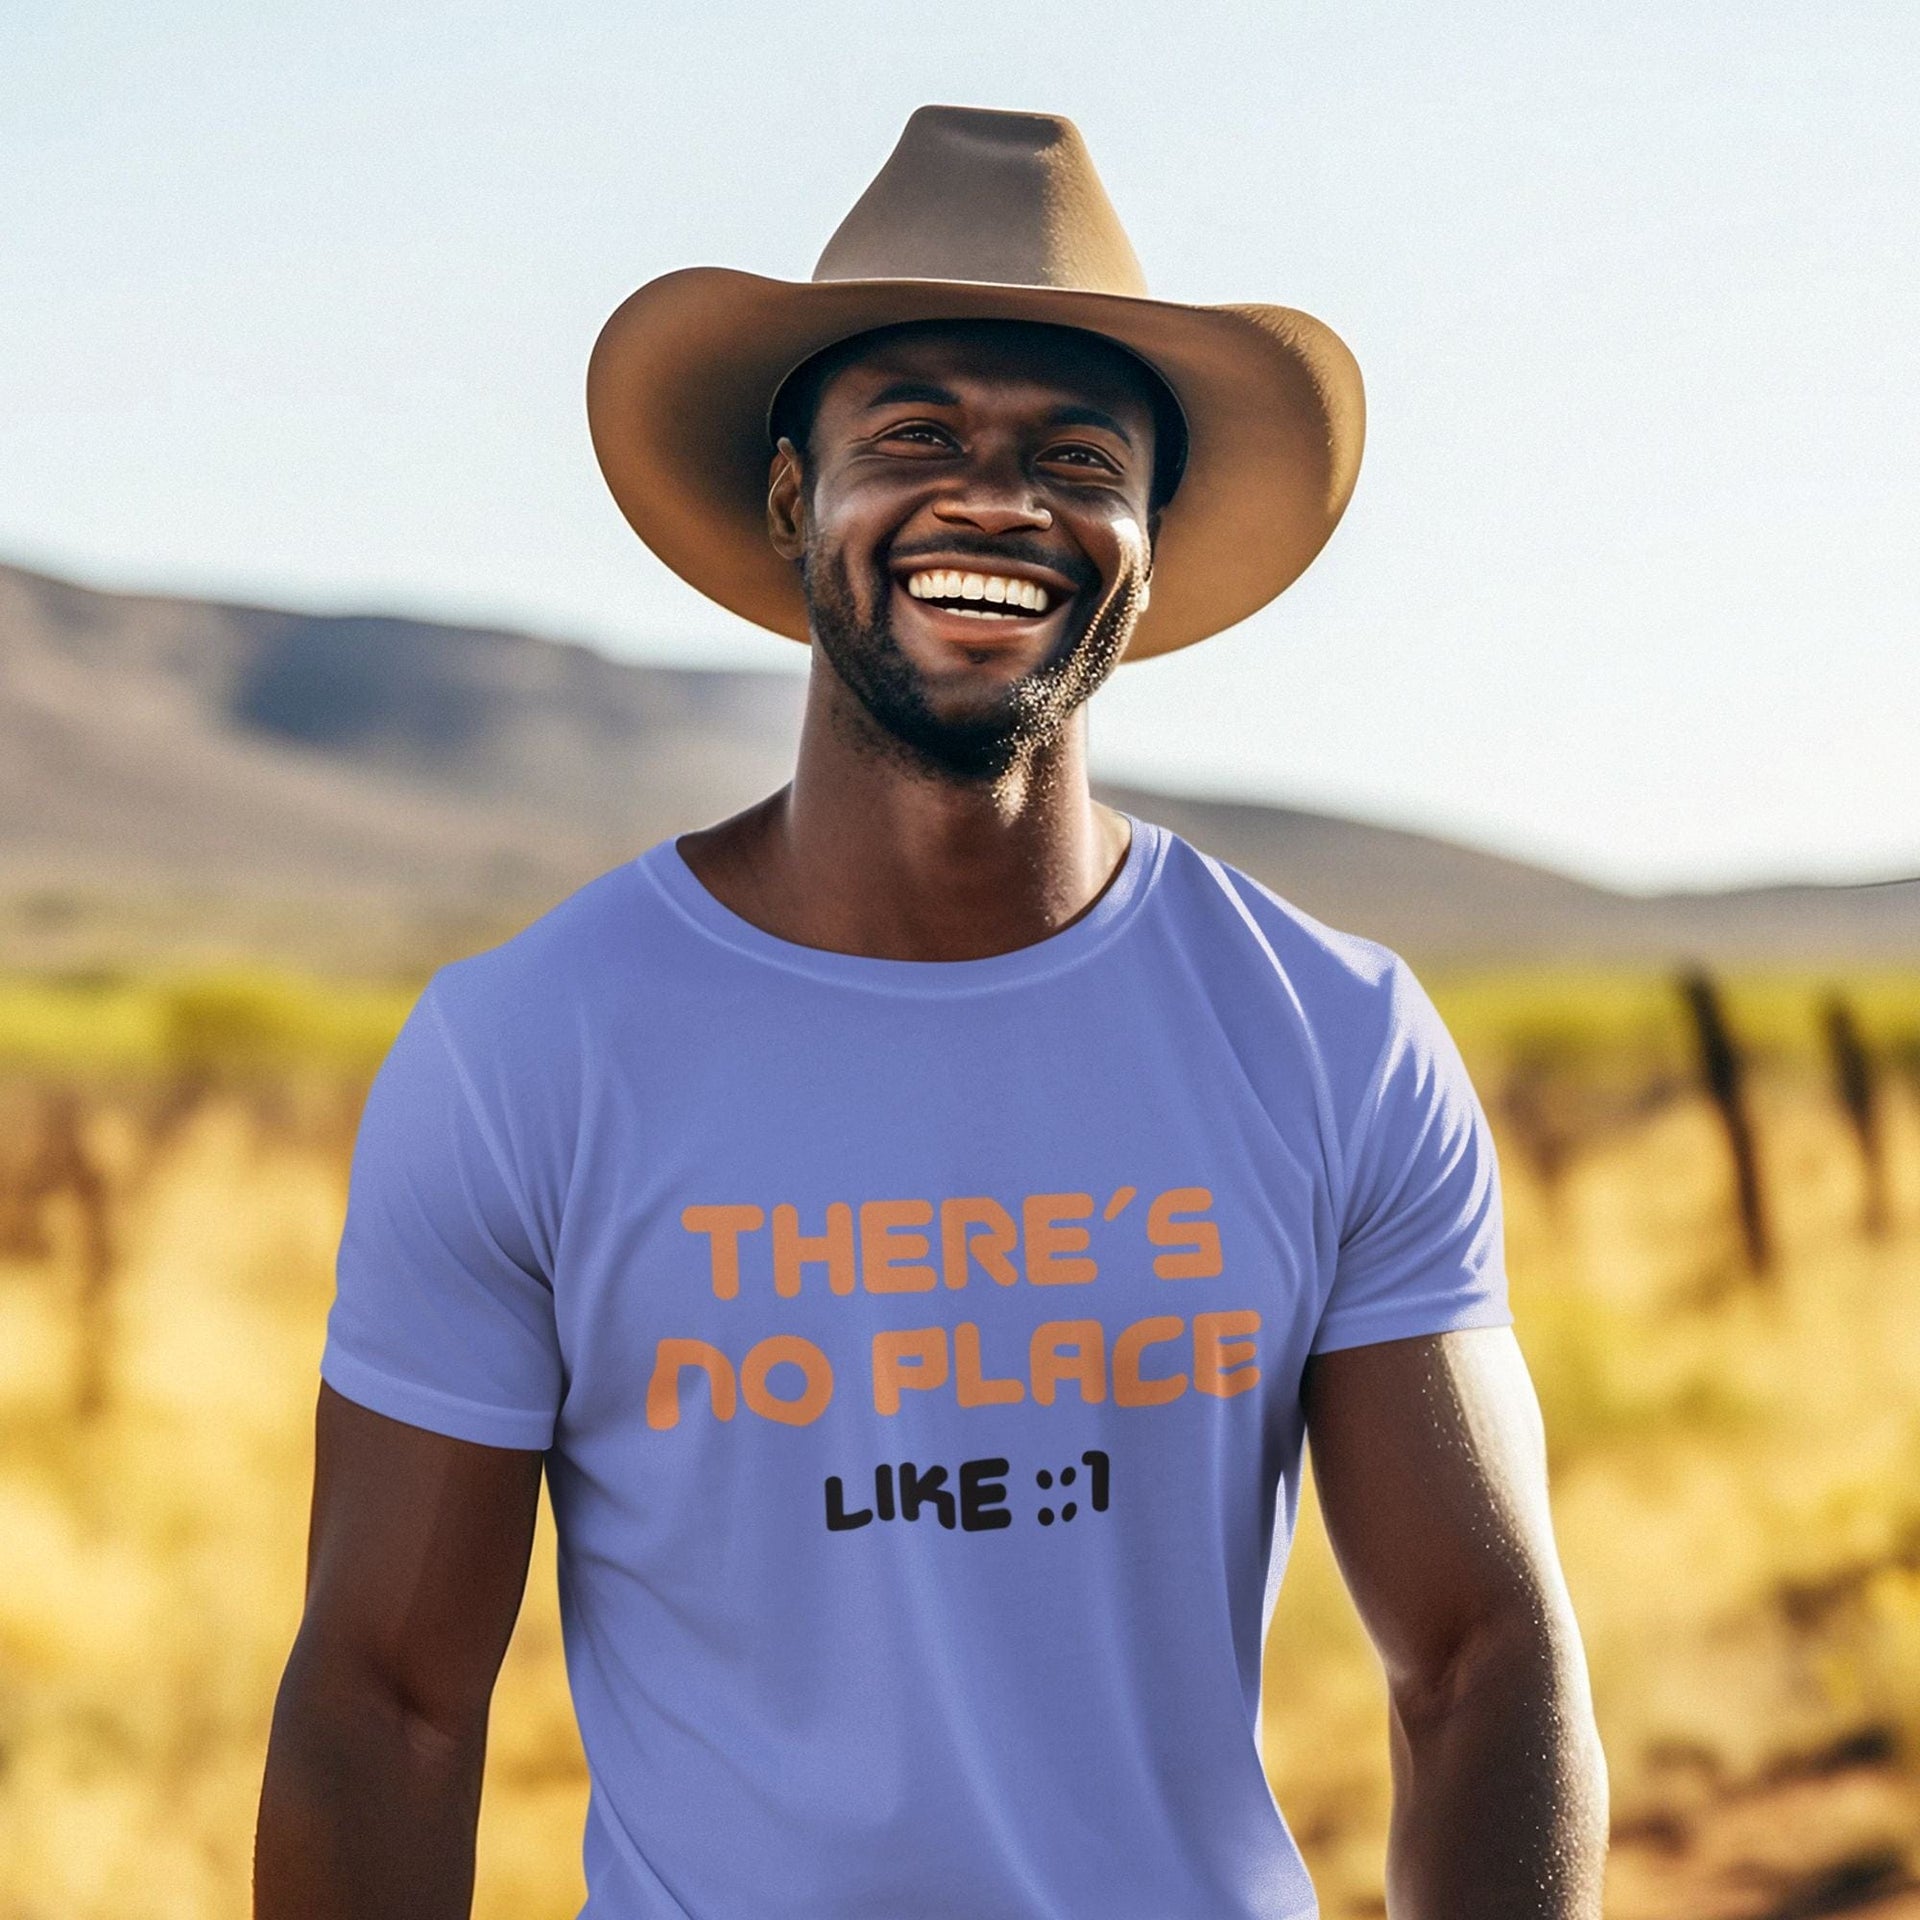 There's No Place Like ::1 - Men's T-Shirt